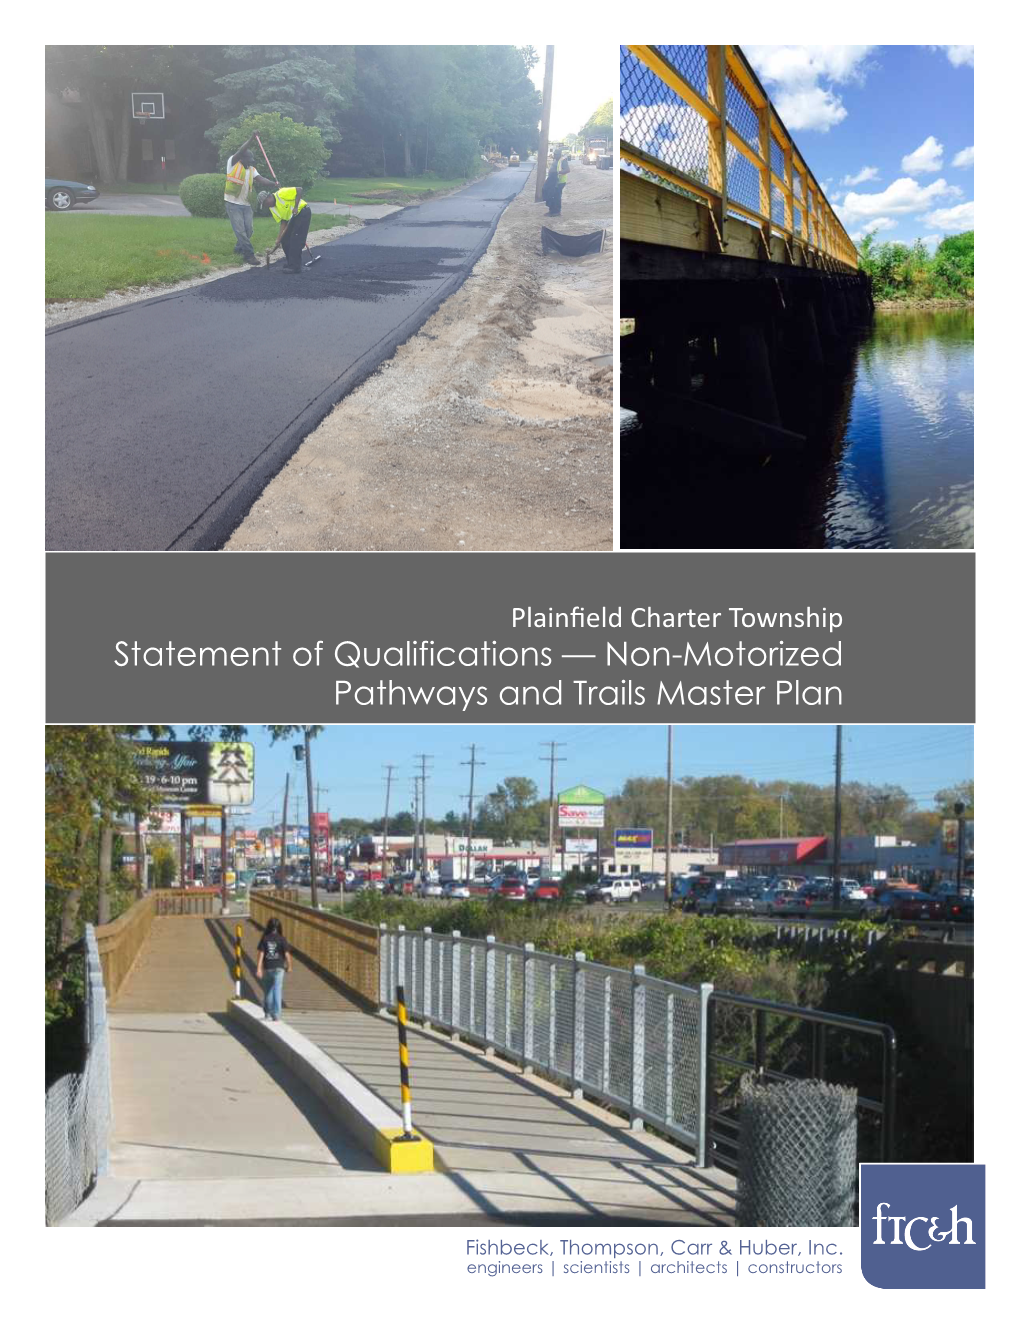 Statement of Qualifications — Non-Motorized Pathways and Trails Master Plan